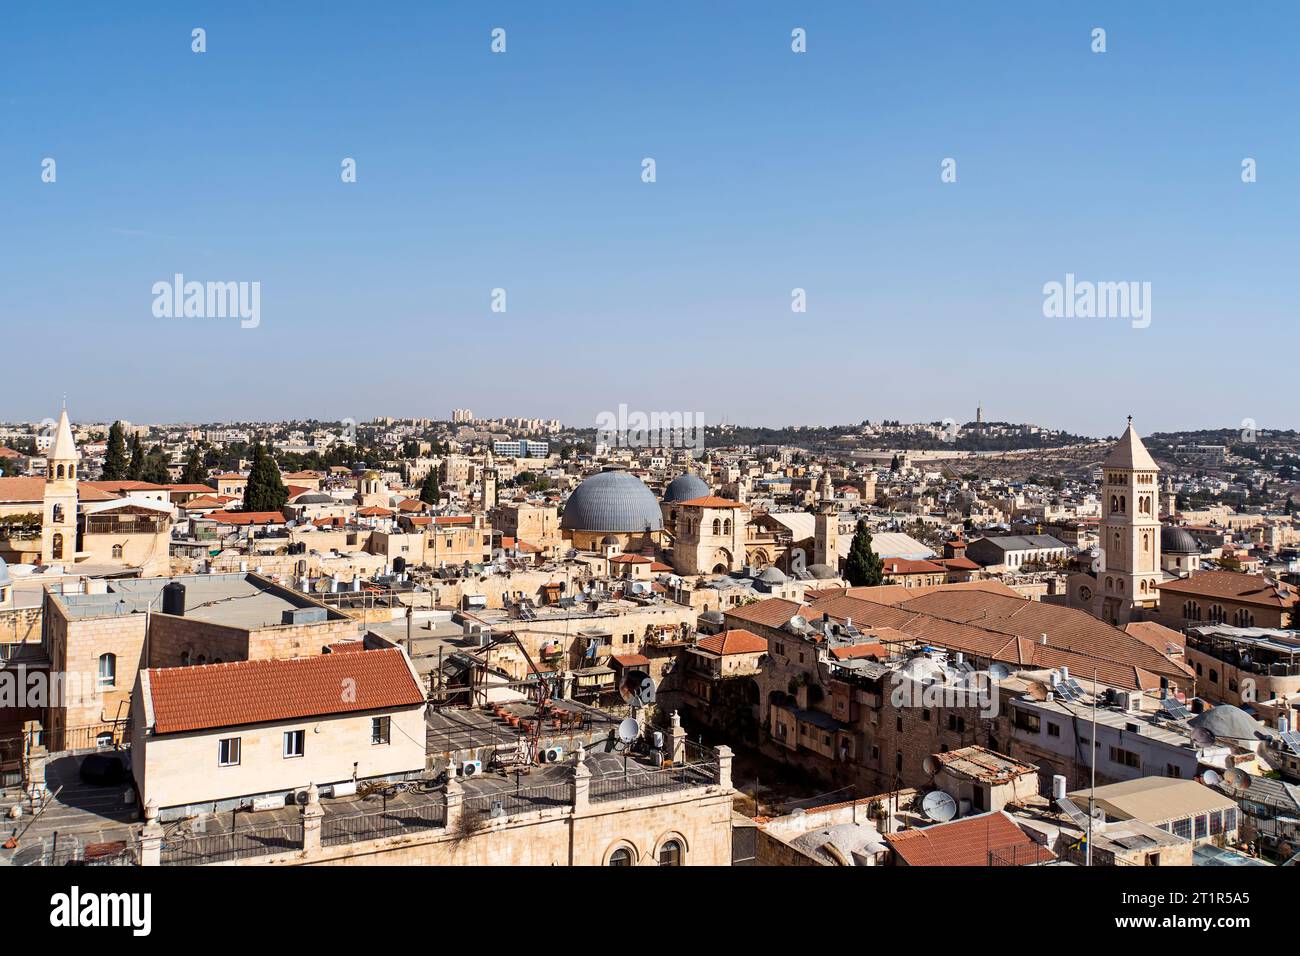 Roofs of buildings in old part of Jerusalem, ancient capital of Israel. Aerial view of an old city. Travelling in Israel, tours in Jerusalem. Cityscap Stock Photo